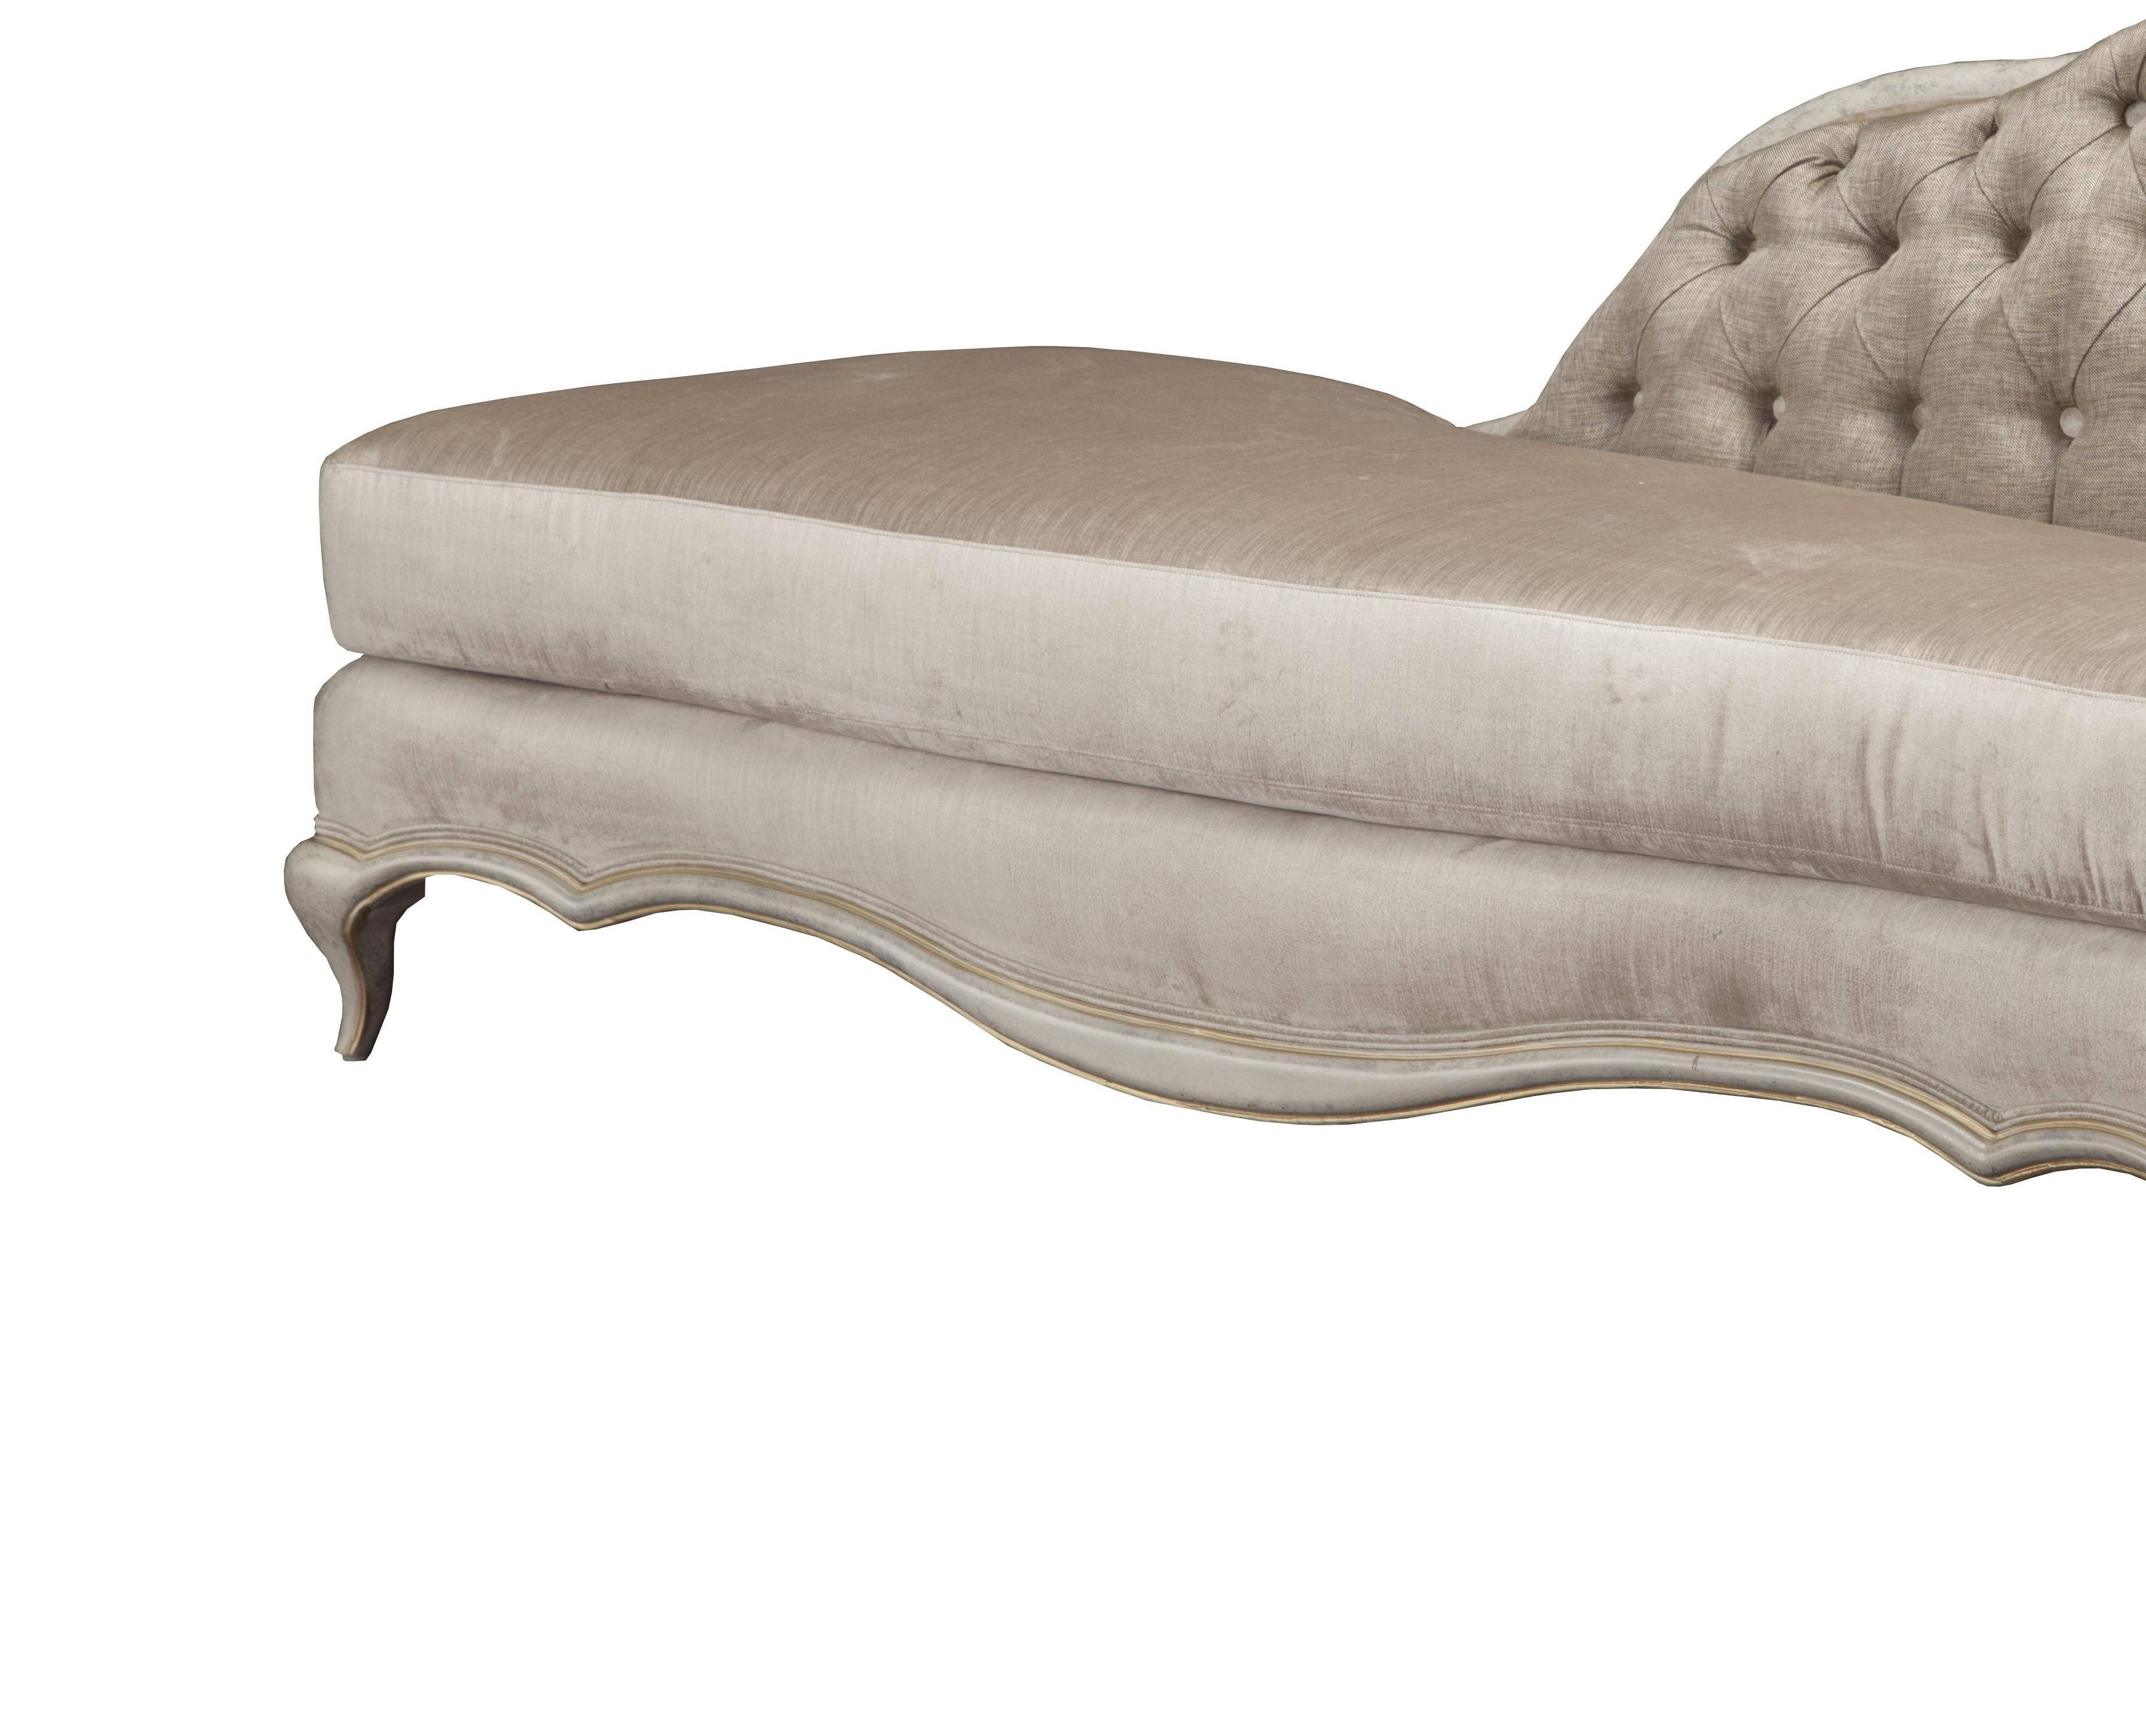 Most Popular Benetti’s Perlita Luxury Beige Pearl Silk Chenille Silver Gold Chaise Lounge Throughout Pearl Chaise Lounges (View 8 of 25)